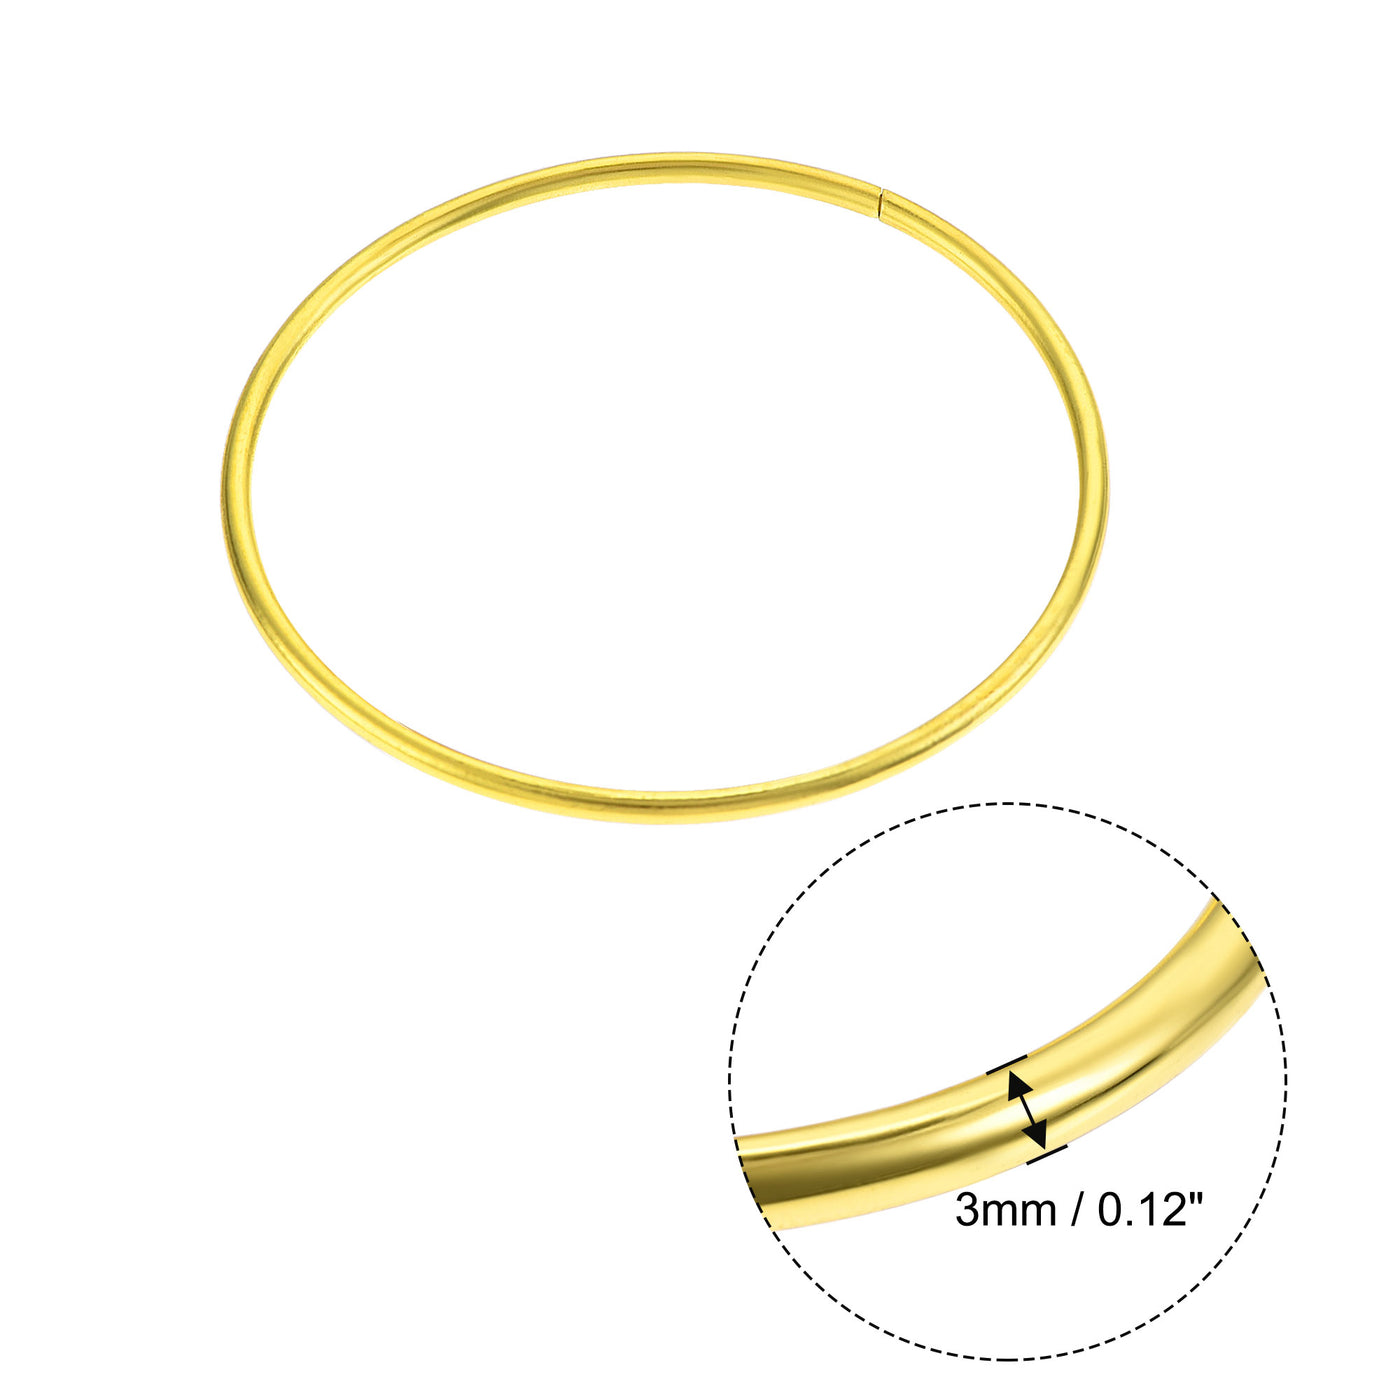 uxcell Uxcell Metal Craft Hoops Rings 80mm(3.15") OD for DIY Wreaths, Macrame Projects 12pcs